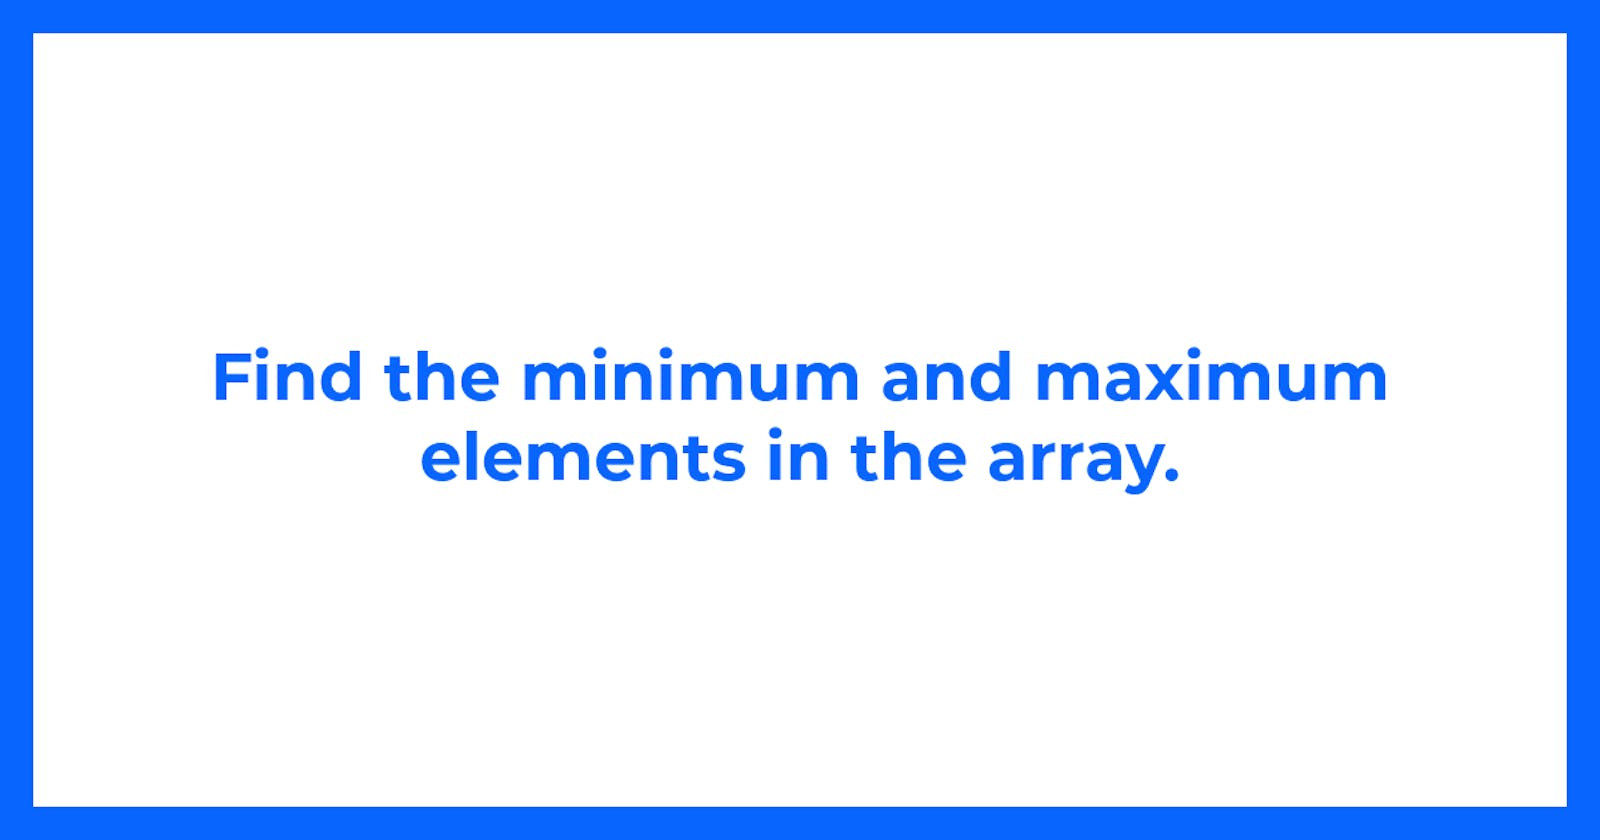 Find the minimum and maximum elements in the array.